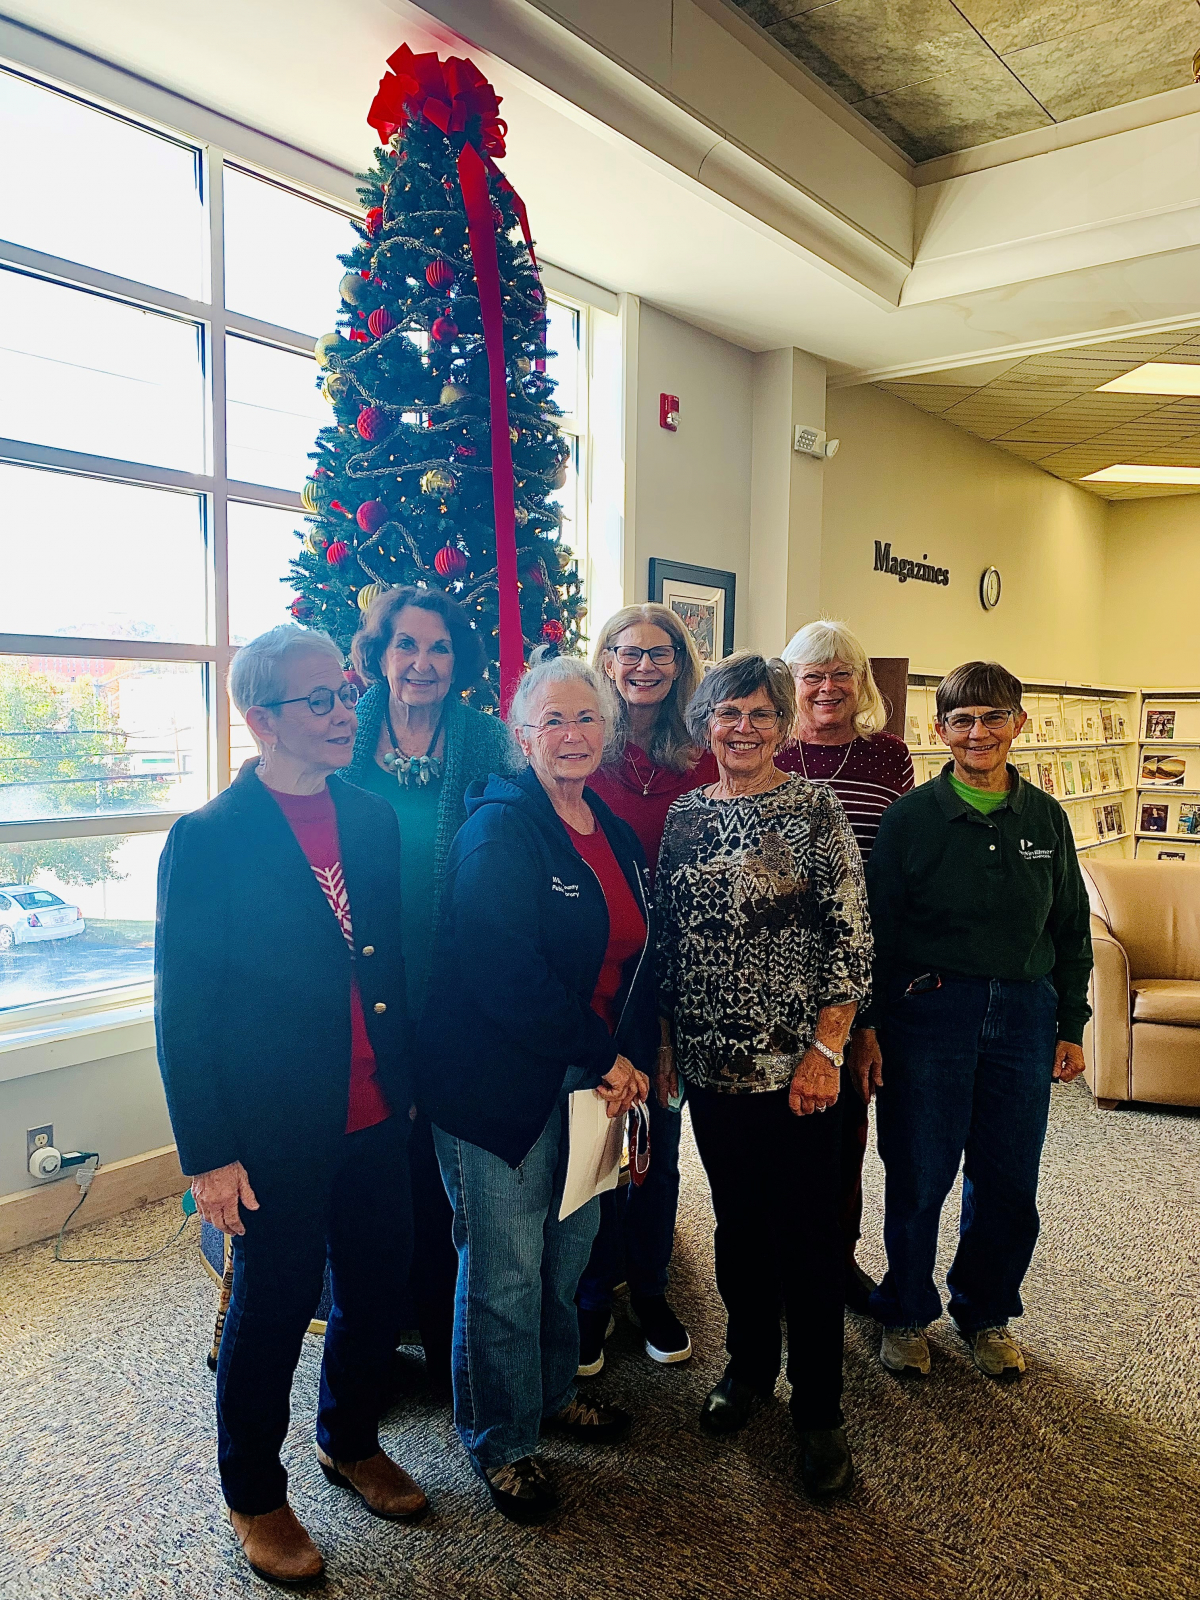 Tree decorated by members of the Apple Blossom Garden Club  Left to Right Back Row:  Bettye Hicks, Ann Phillips, Diane Stephens Left to Right Front Row:   Sandy Louzon, Joan Johnson, Fay Kennedy, Pam McCarrick